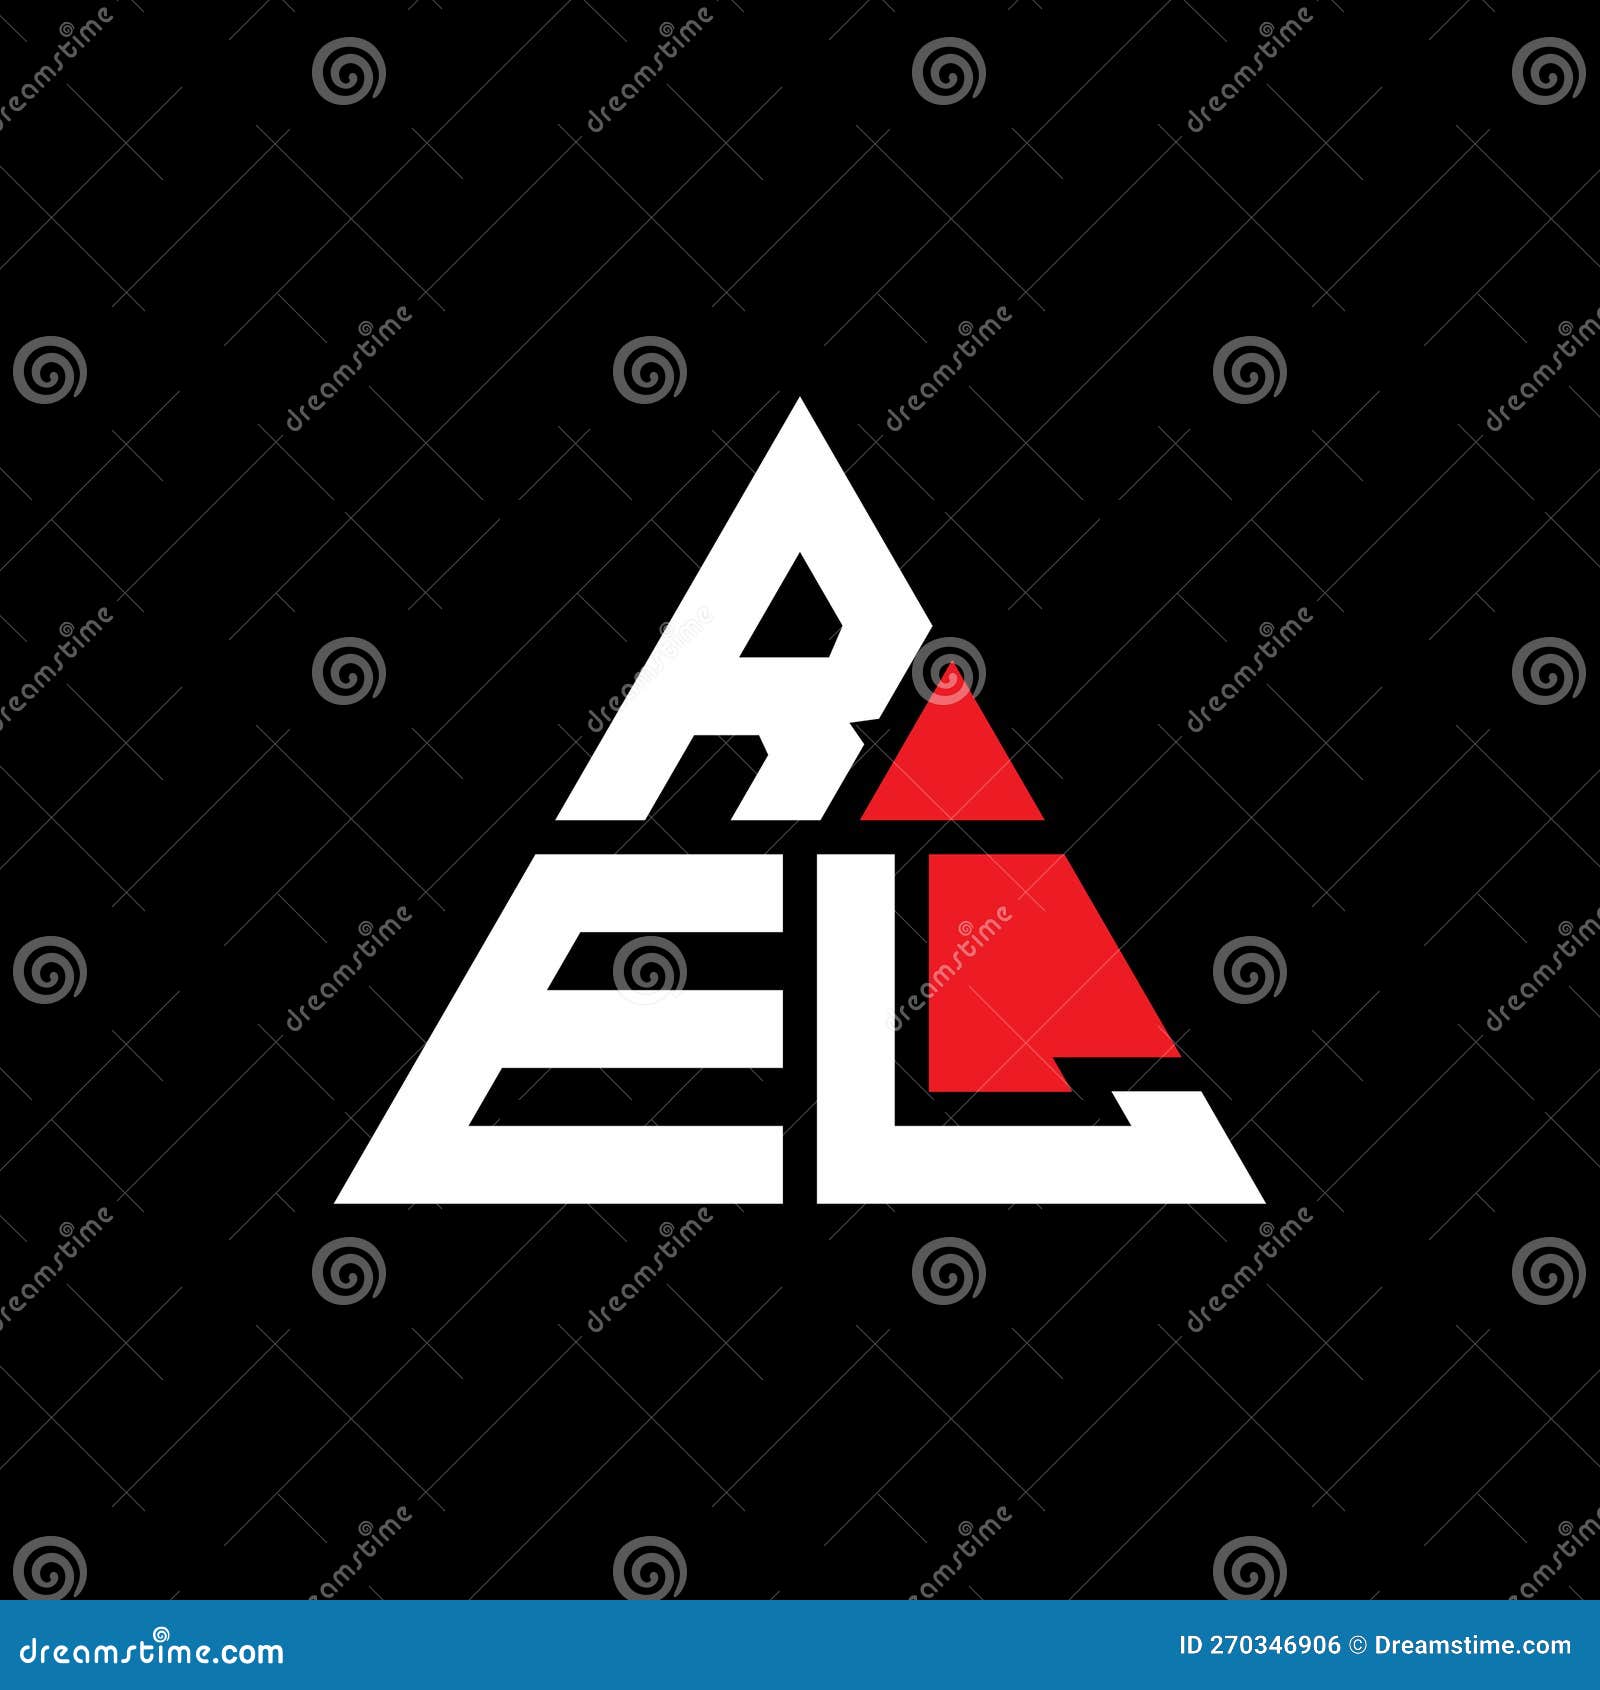 rel triangle letter logo  with triangle . rel triangle logo  monogram. rel triangle  logo template with red